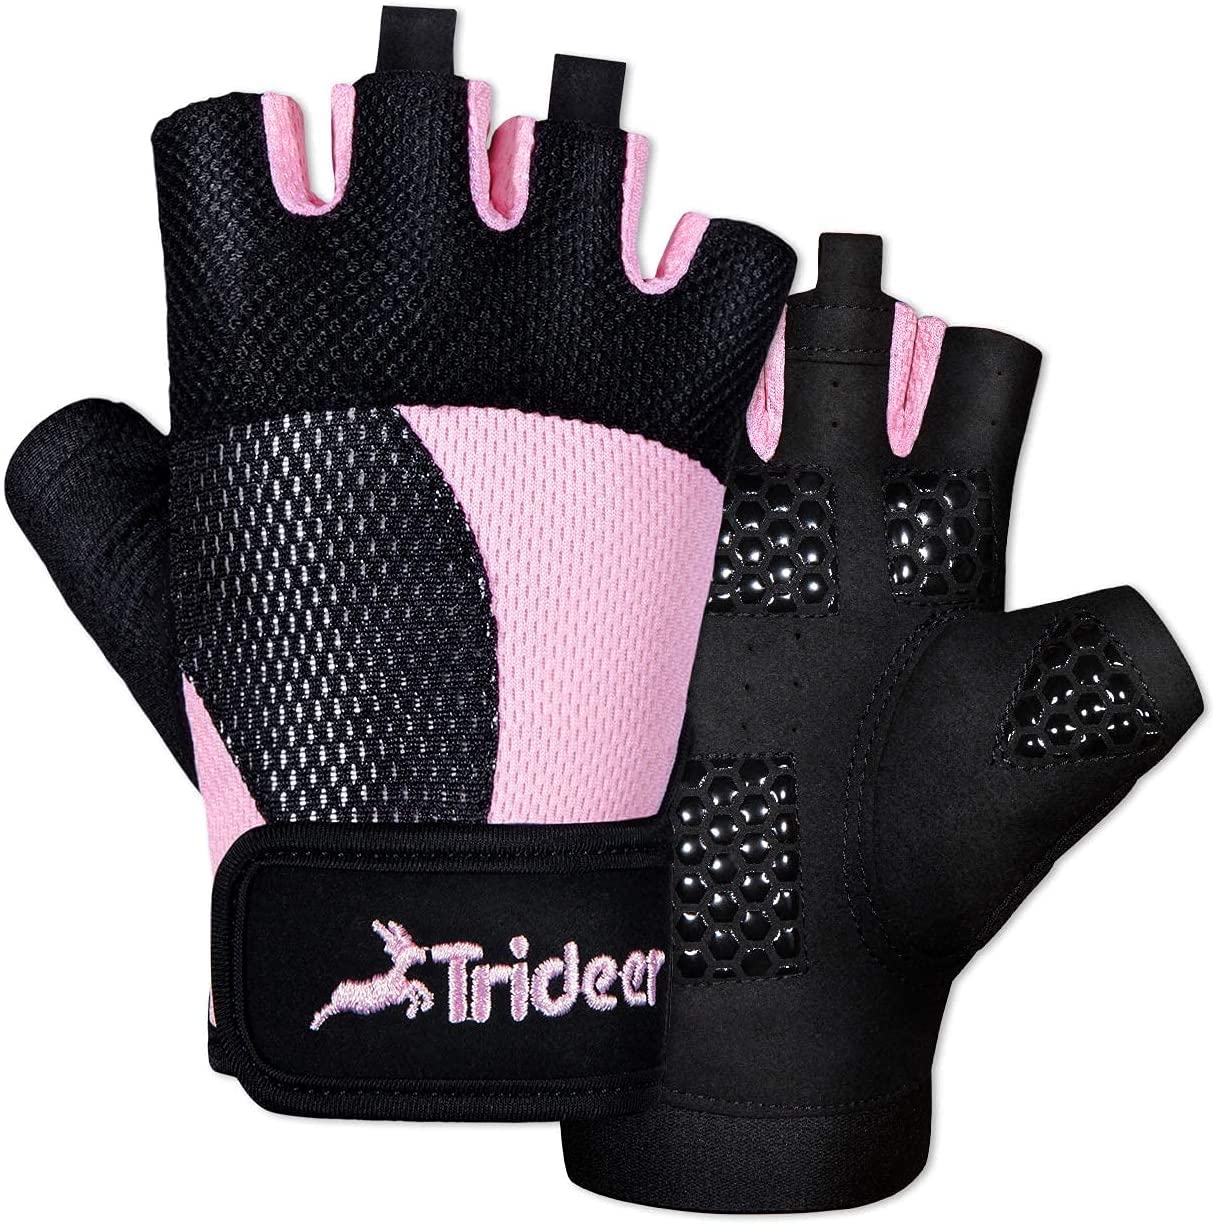 Trideer Breathable Workout Gloves Women with Grip, Weight Lifting